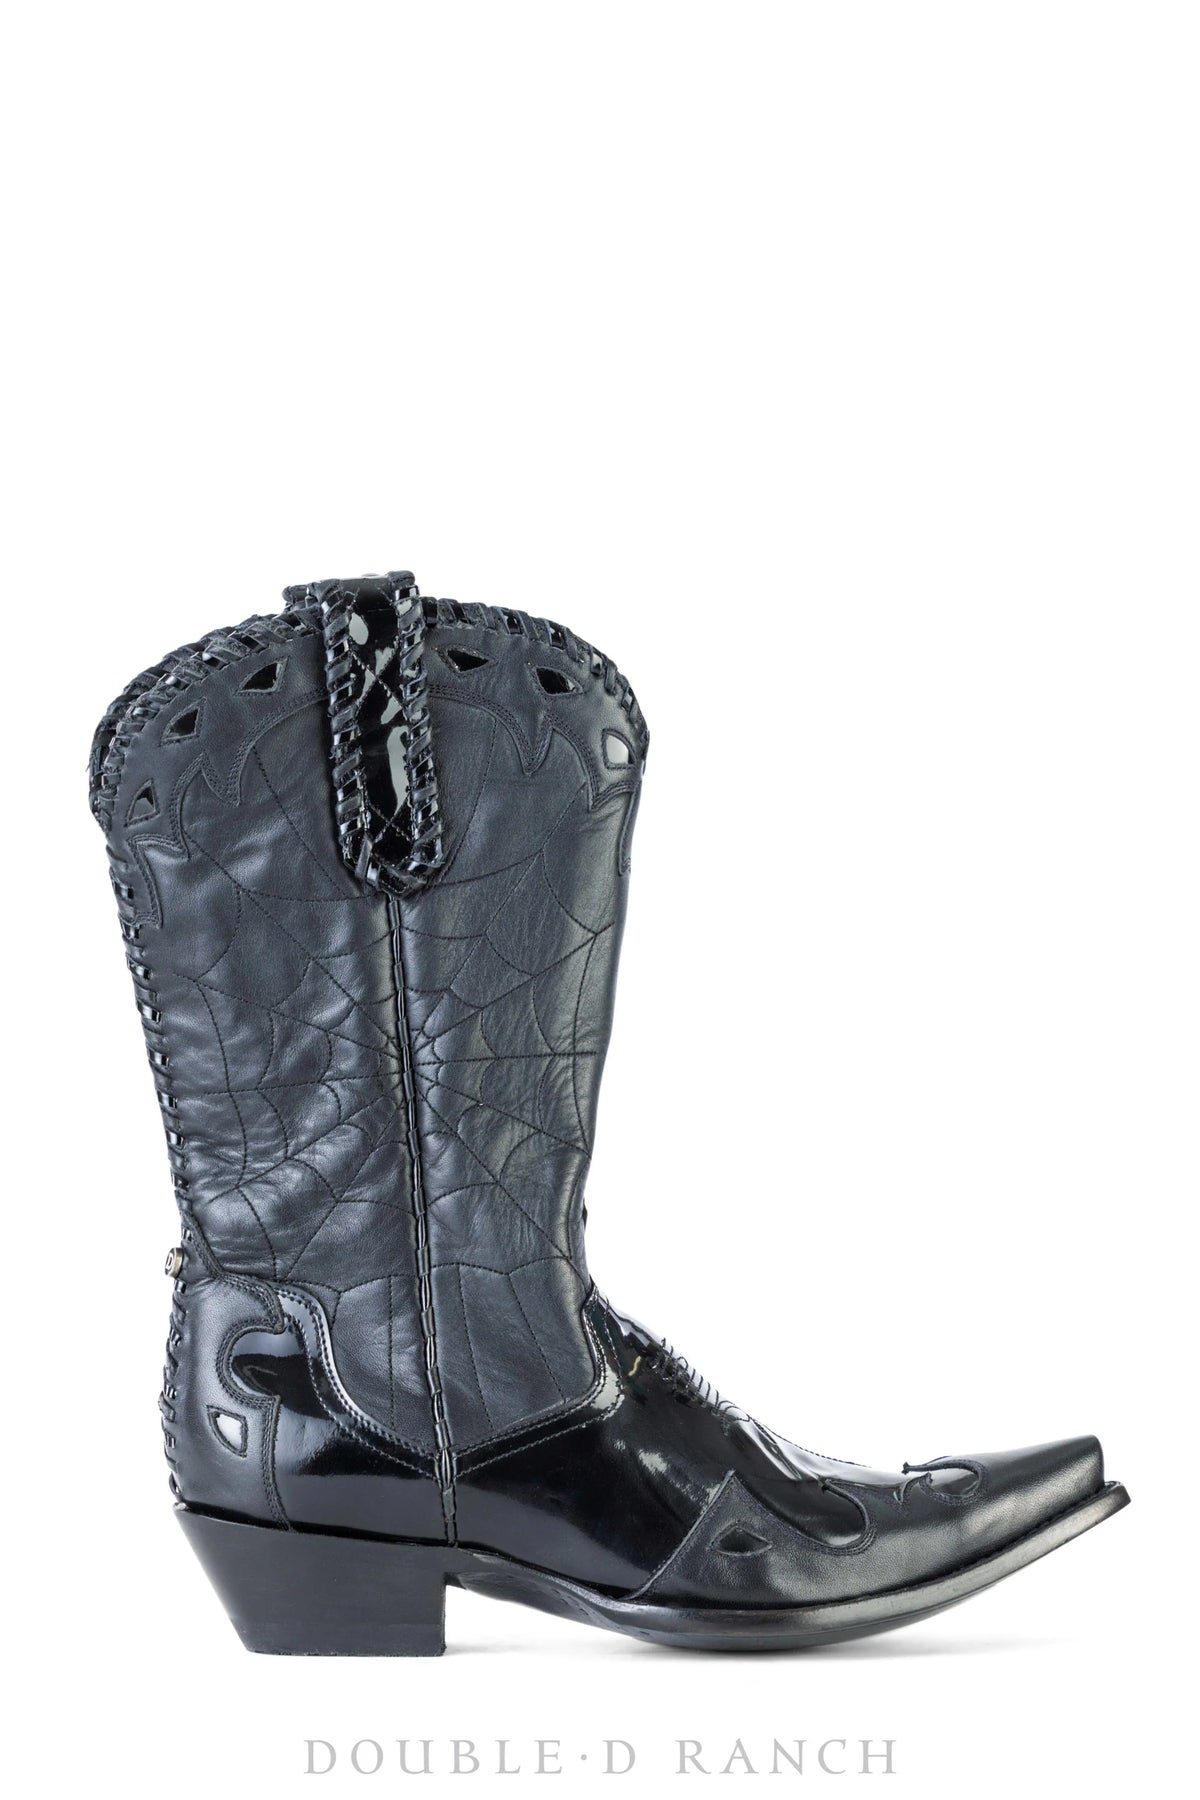 Double D Ranch Dream Spinner Boots in Black